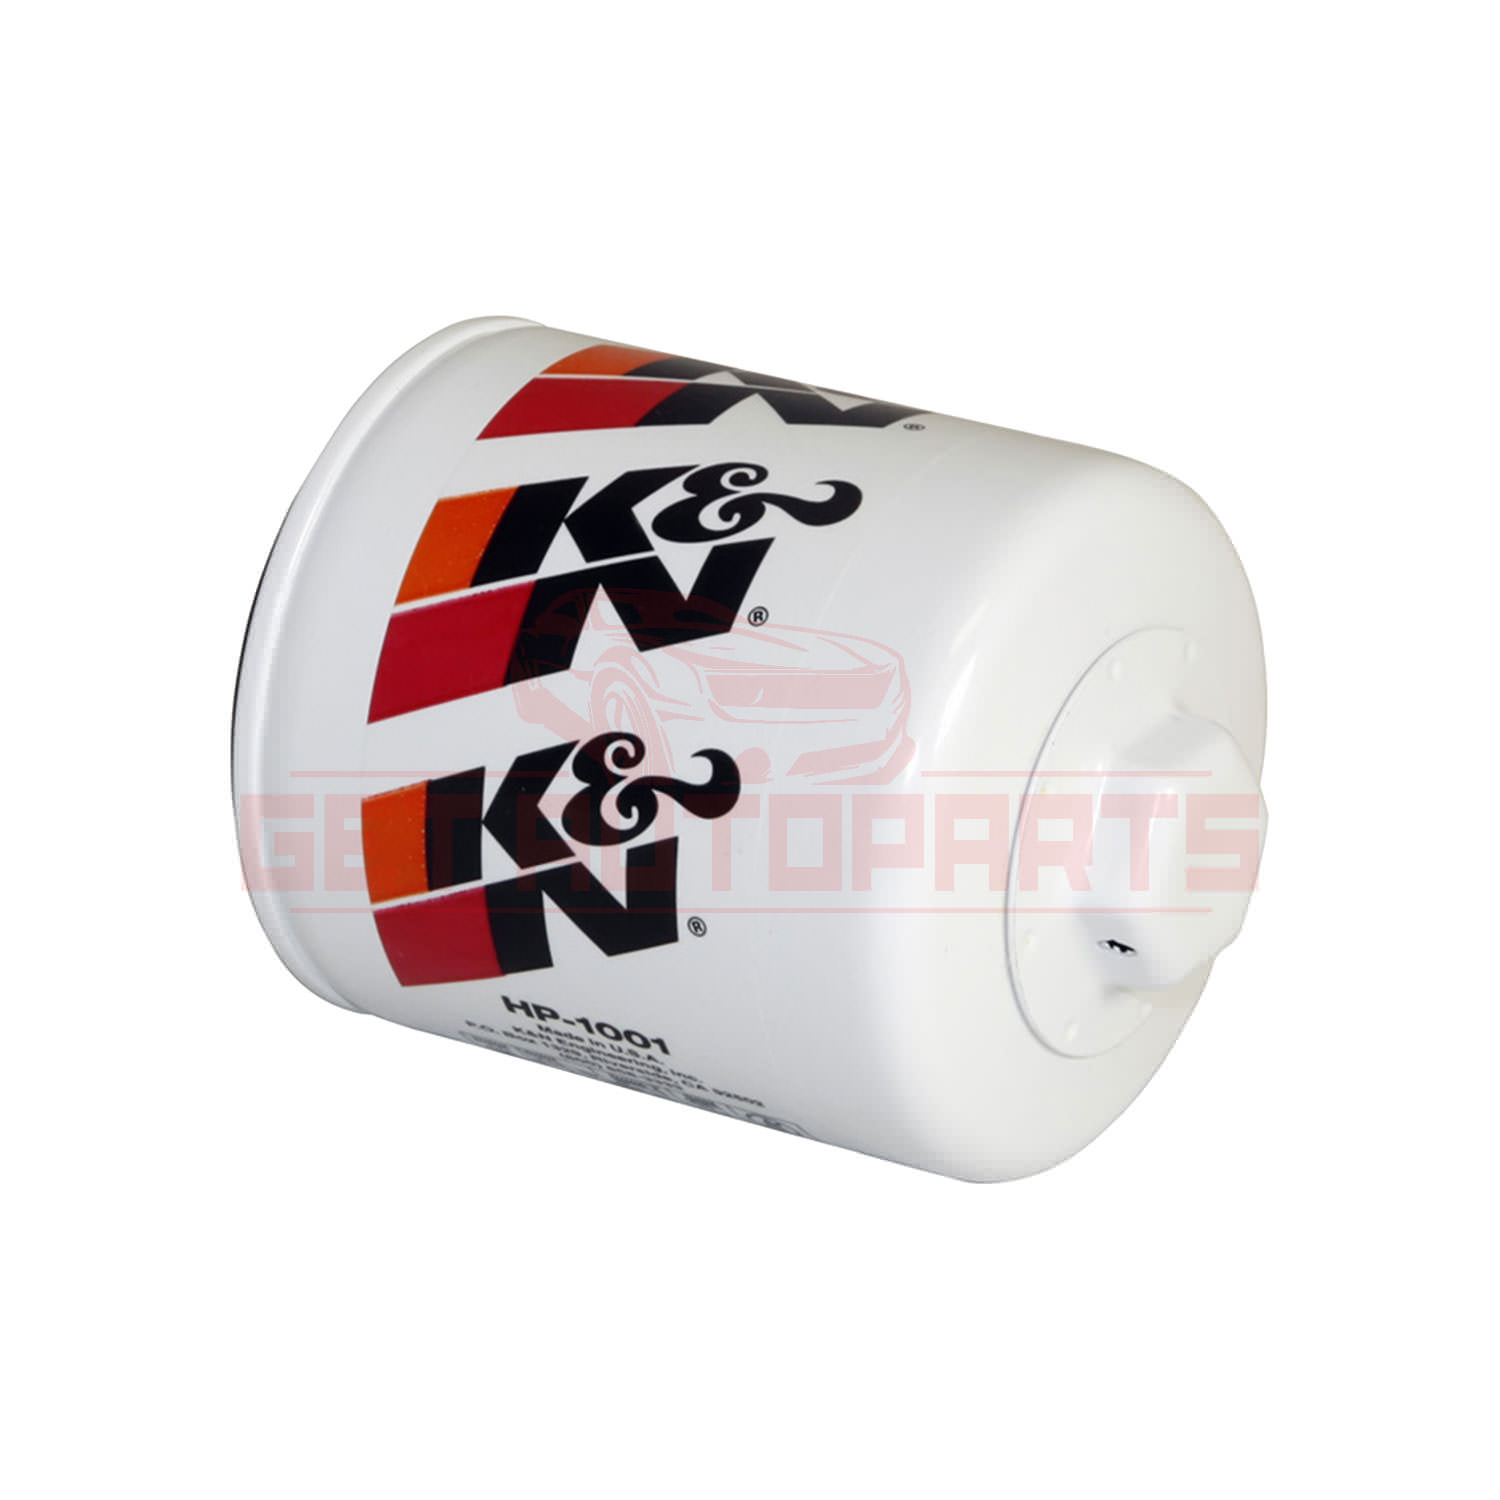 K&N Oil Filter fits Buick Rendezvous 2002-2007